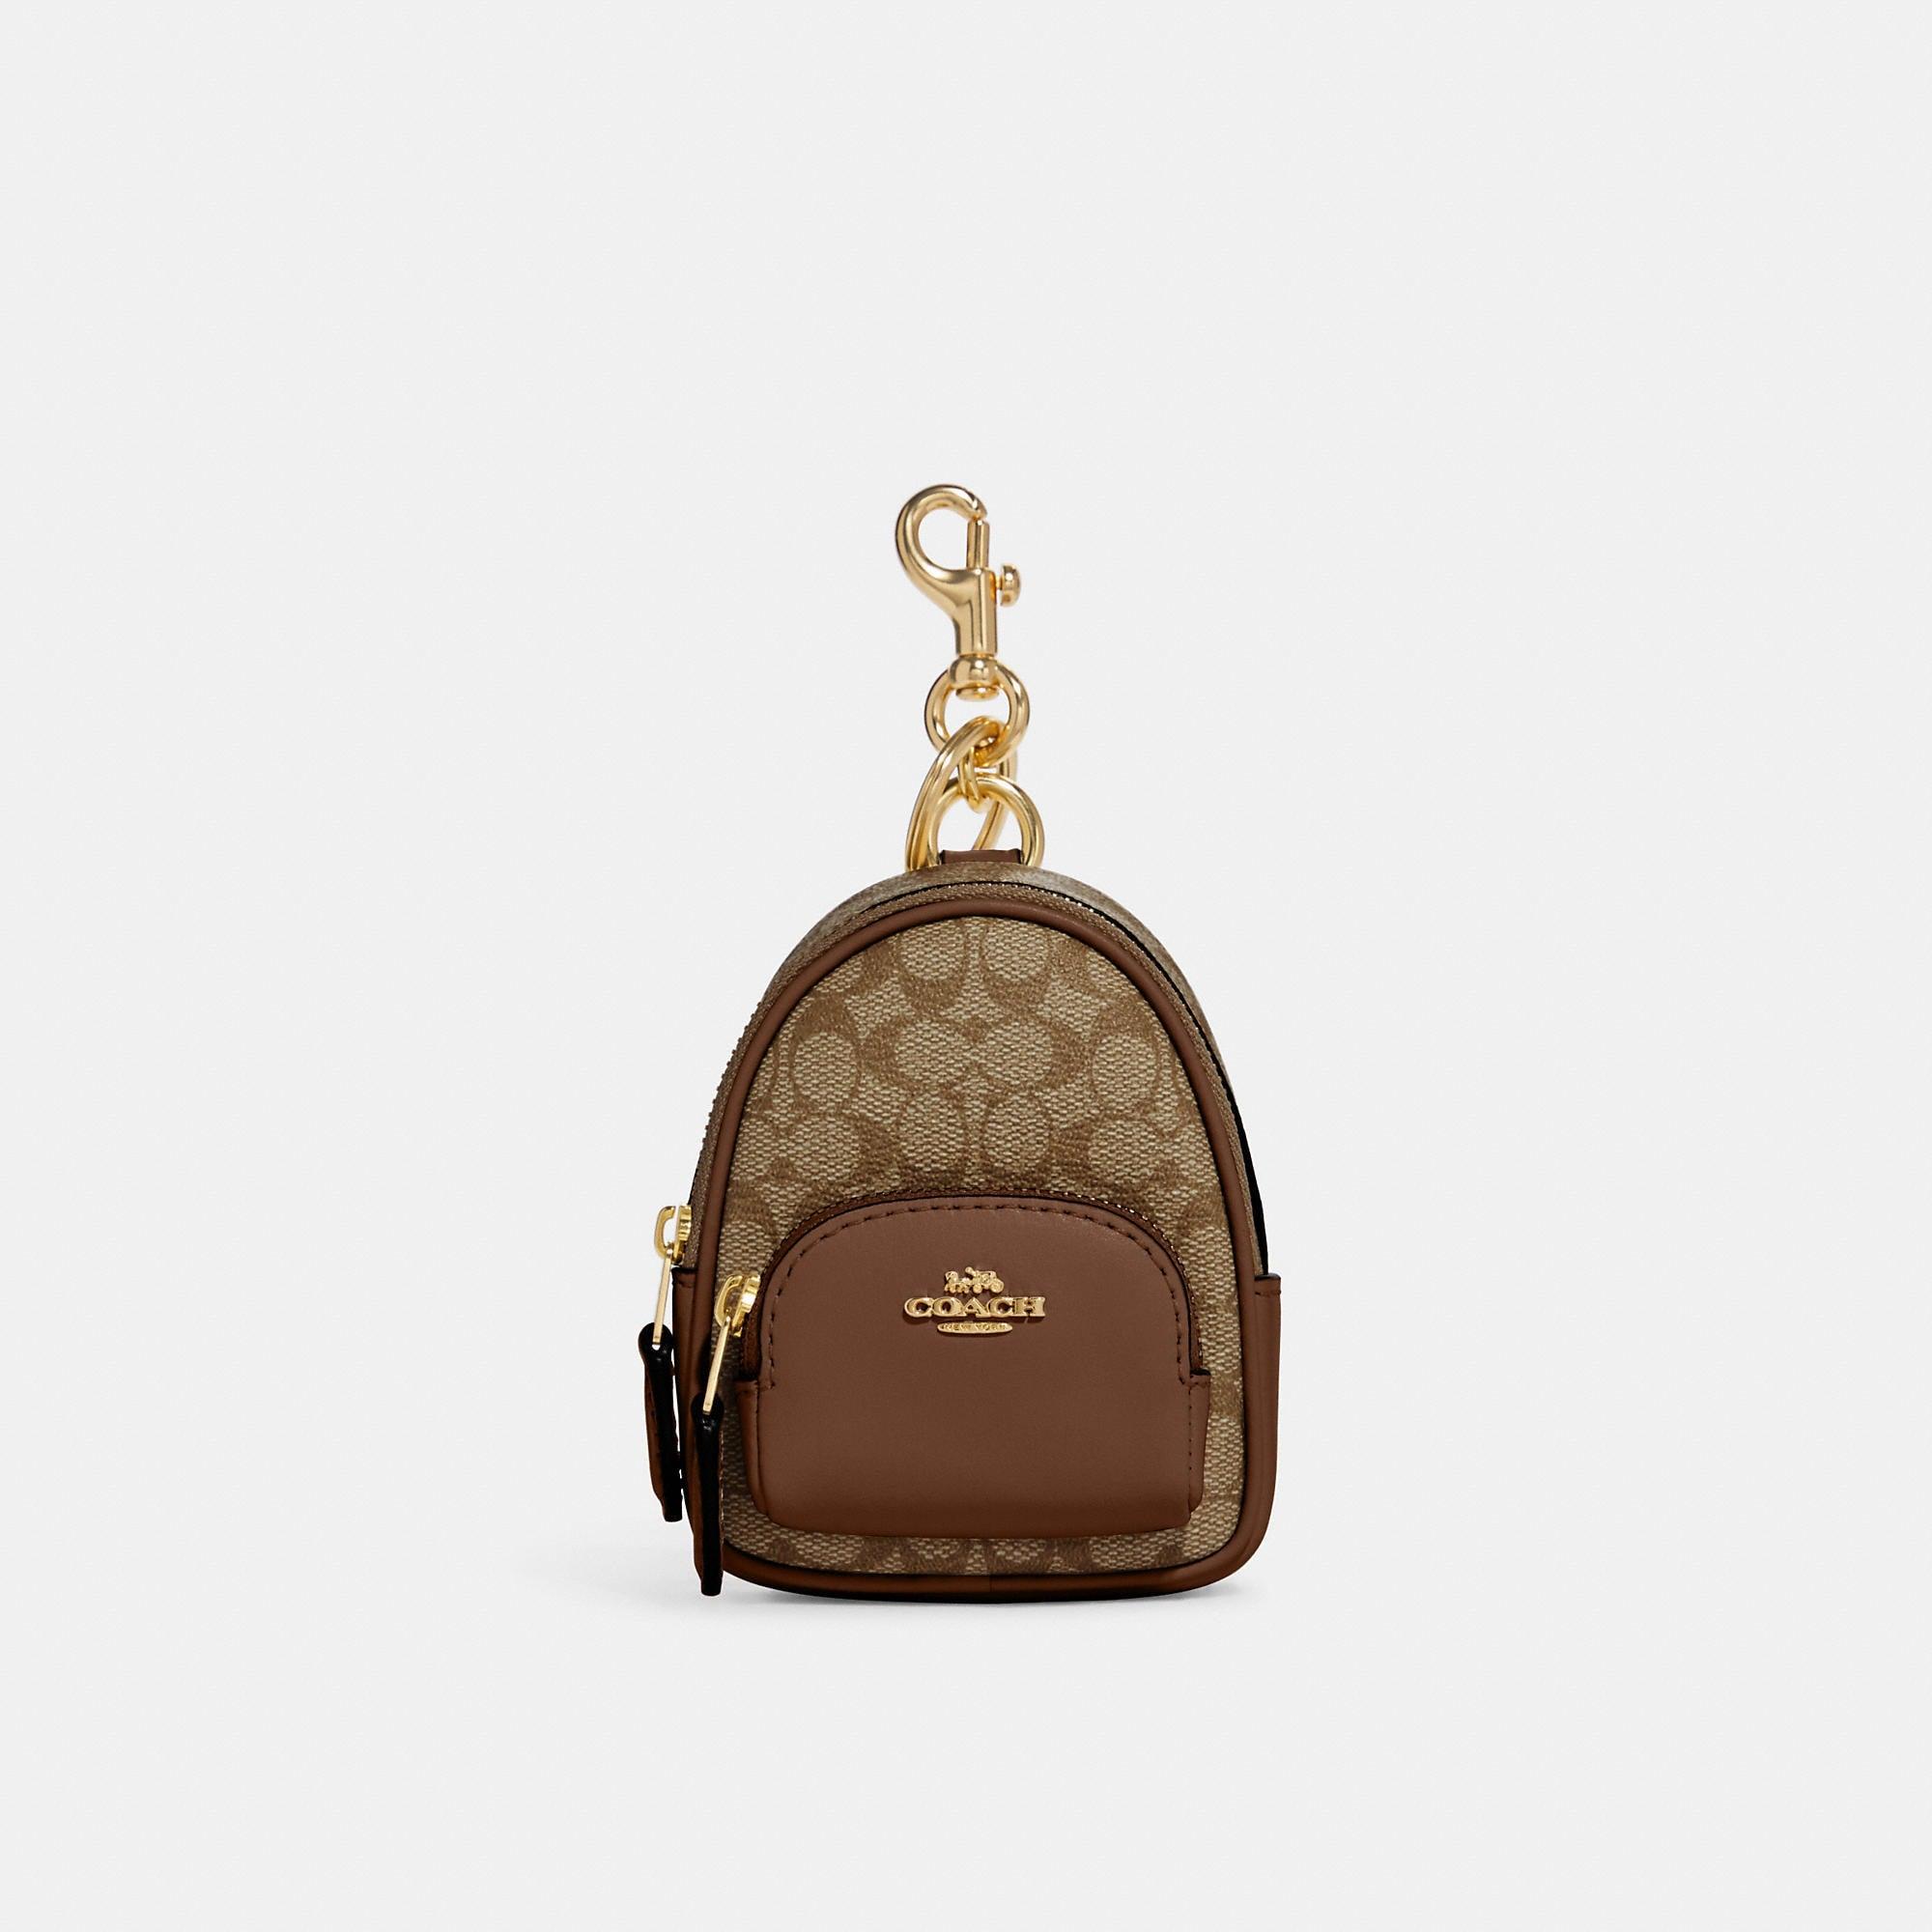 Coach Outlet Mini Court Backpack Bag Charm in Brown